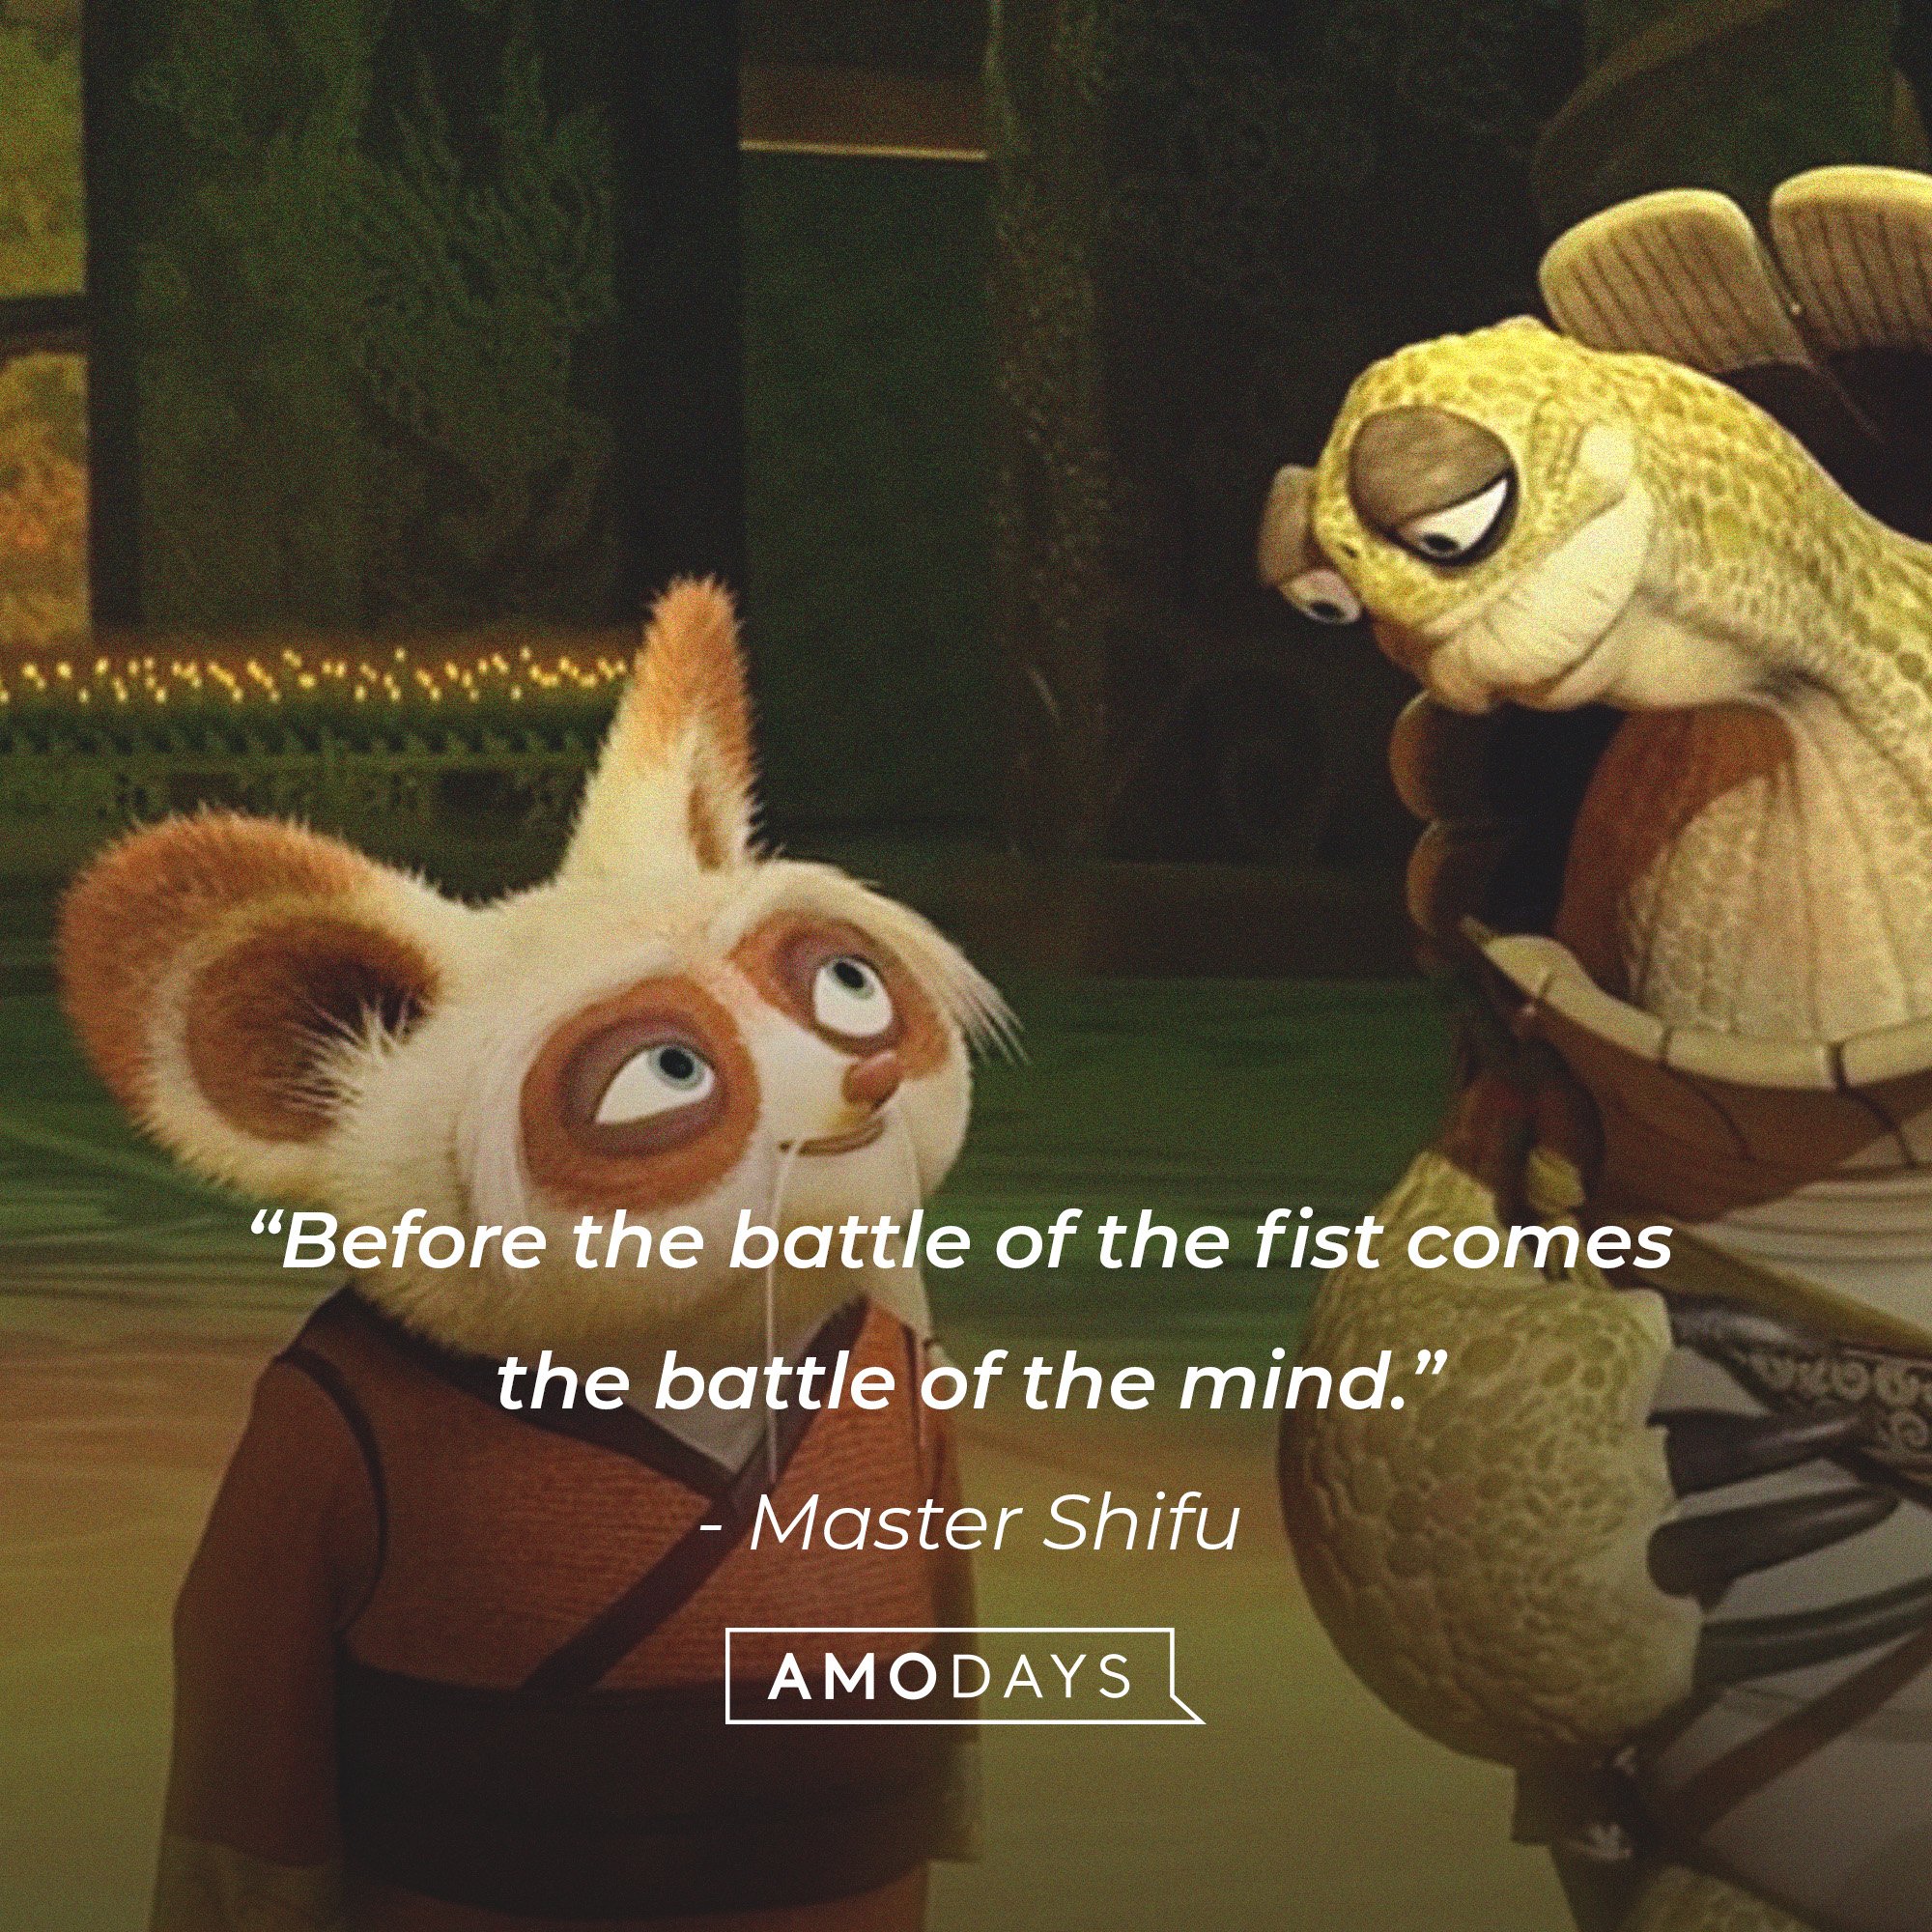  Master Shifu’s quote: “Before the battle of the fist comes the battle of the mind.” | Image: AmoDays